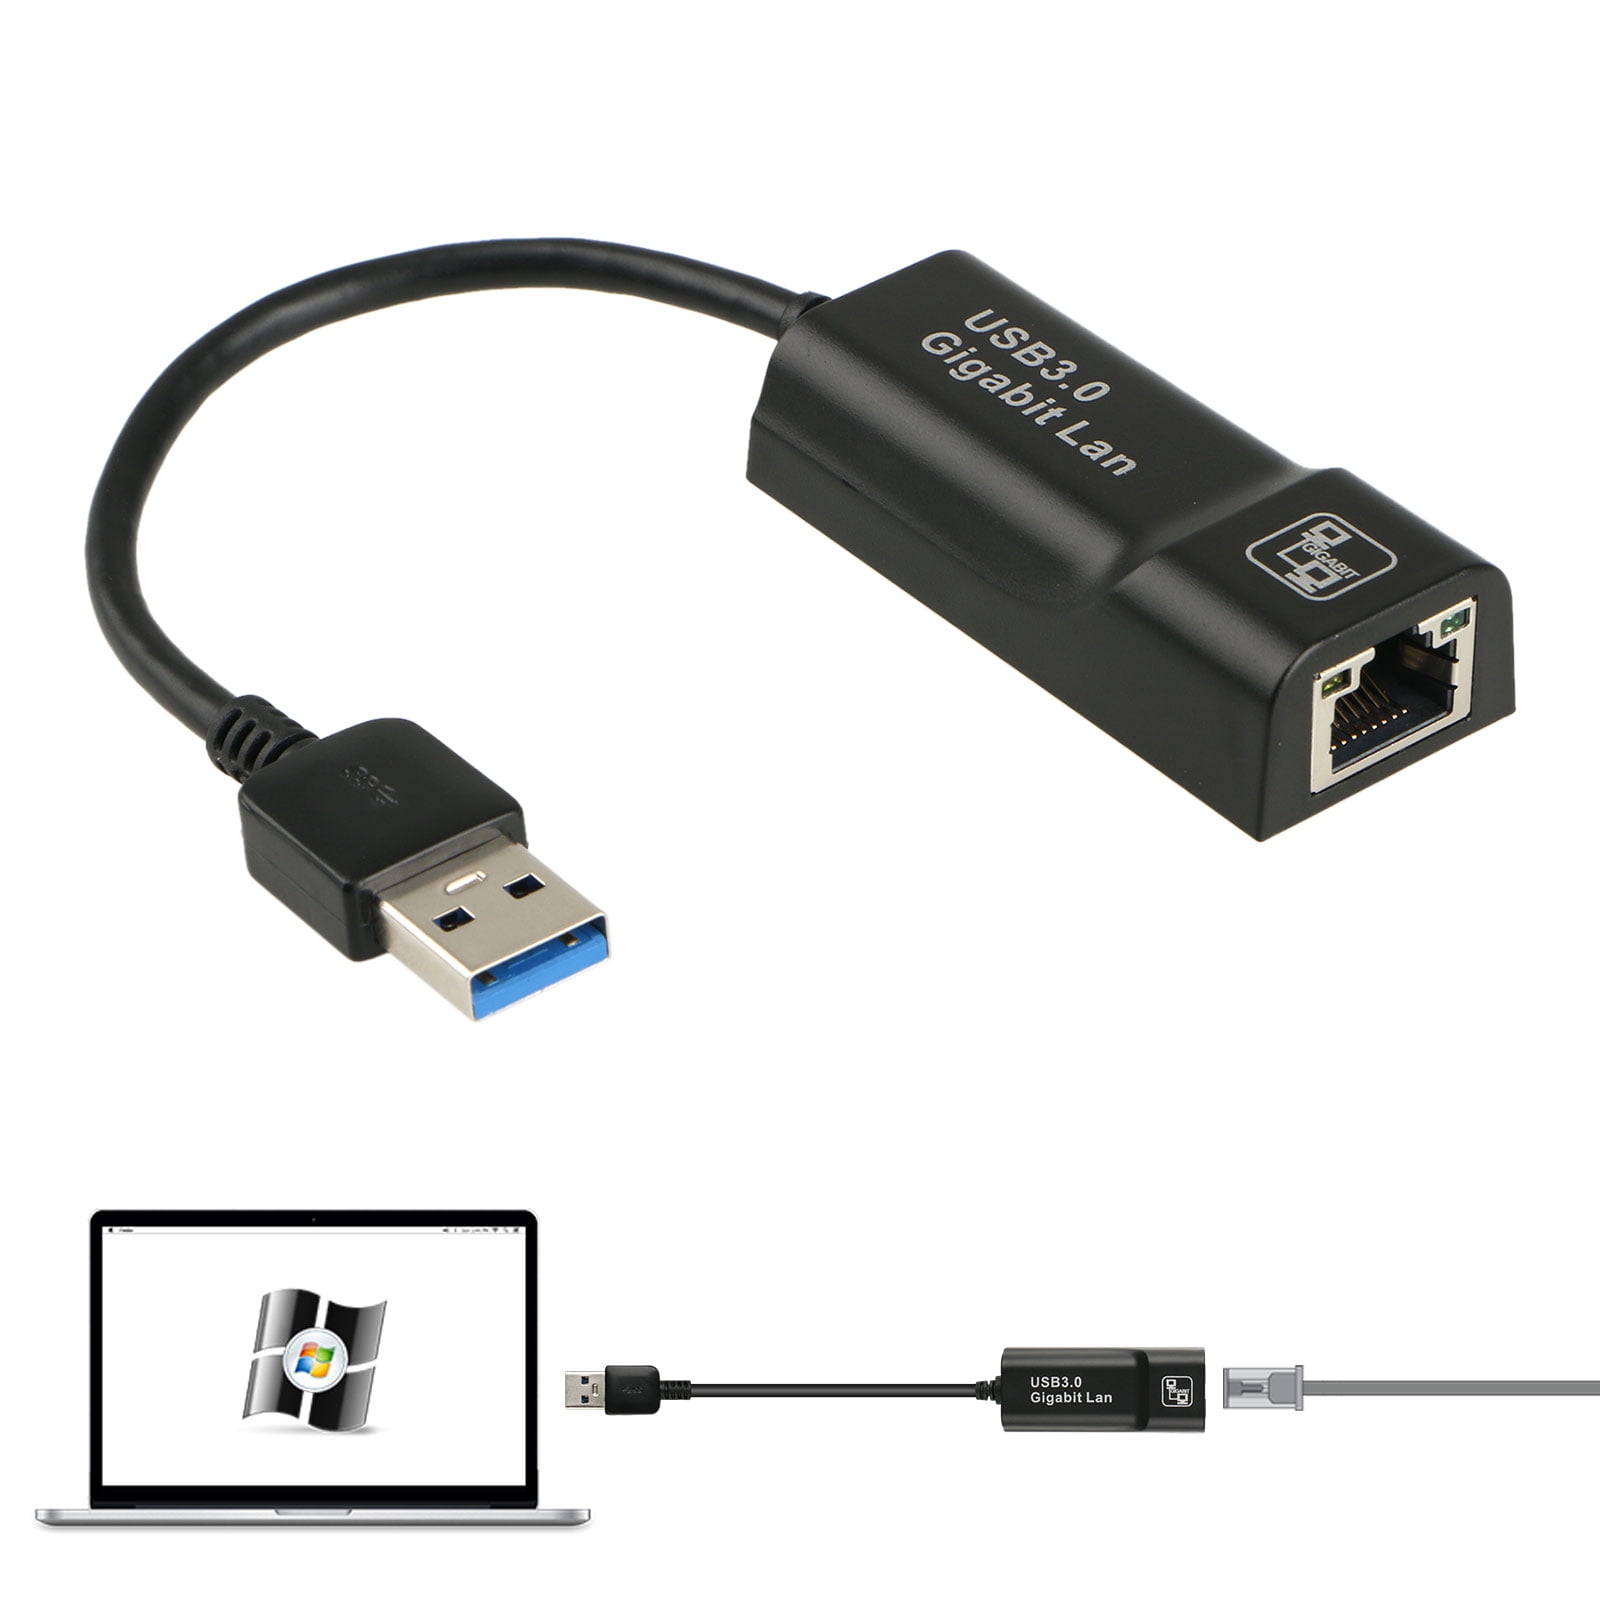 USB & RJ45 Ethernet Lan Network Card Cable Adapter 100/1000Mbps for iPhone iPad 